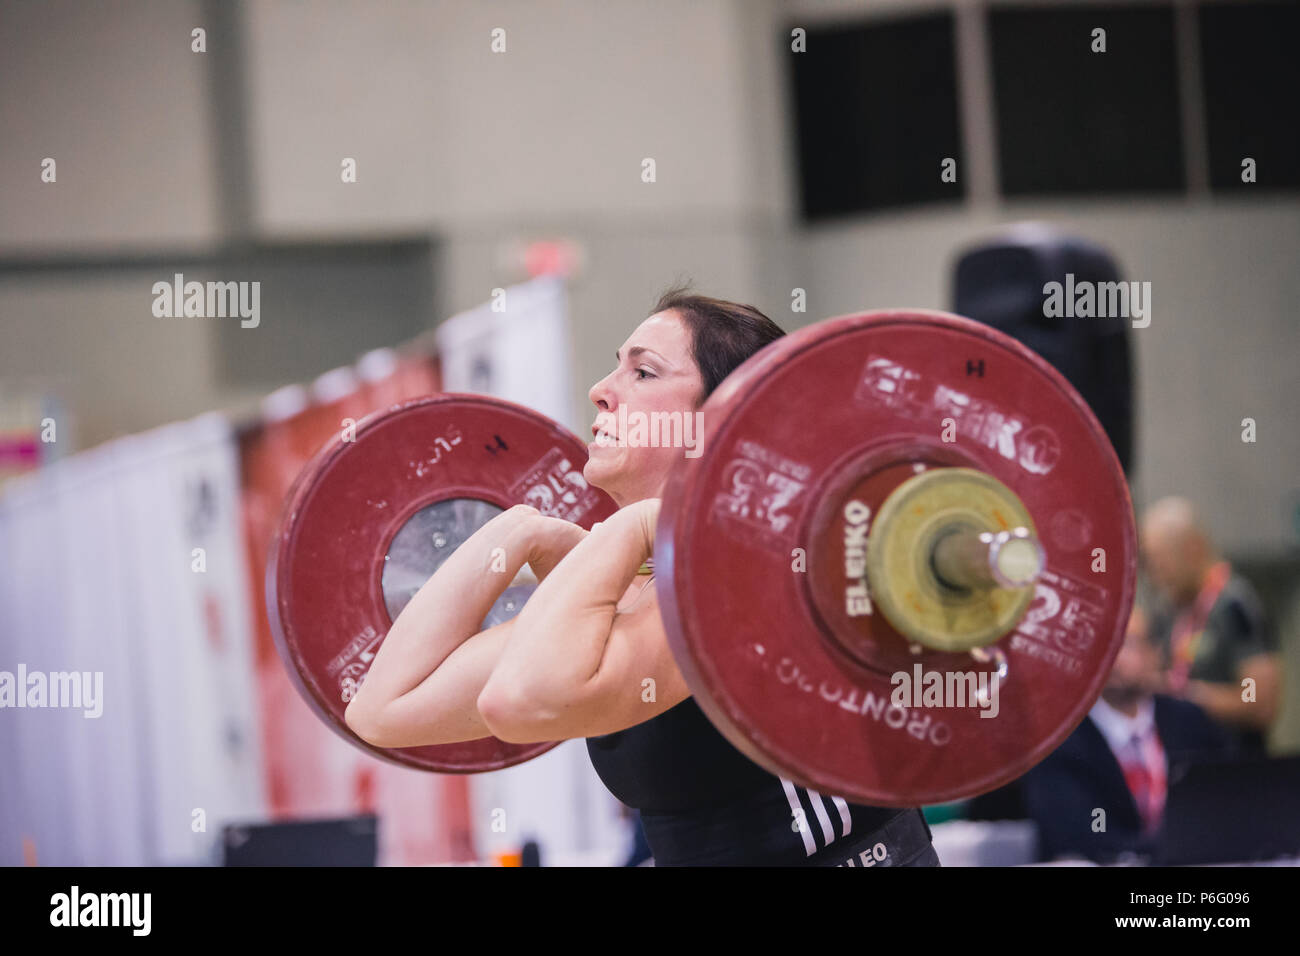 woman weight lifting competition Stock Photo